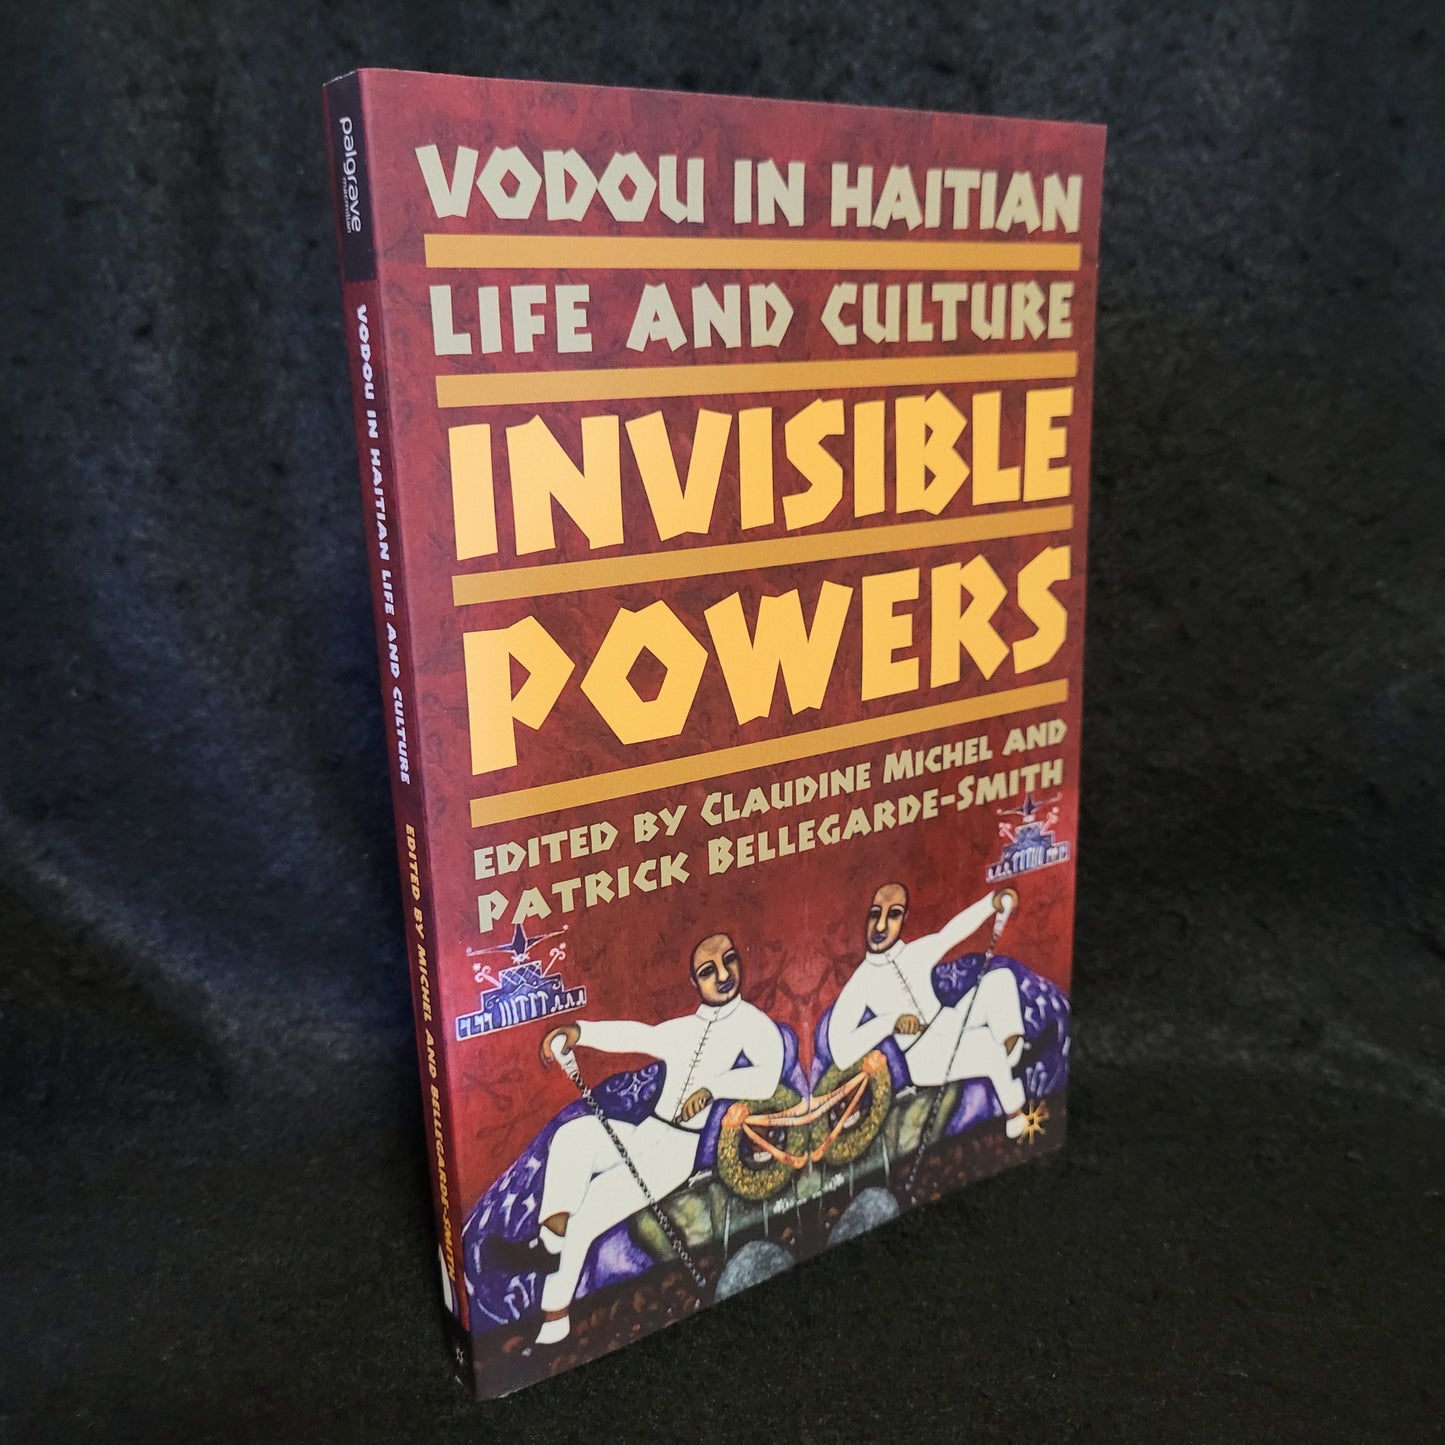 Invisible Powers: Voudou in Haitian Life and Culture edited by Claudine Michel and Patrick Bellegarde-Smith (Palgrave Macmillan, 2006) Paperback